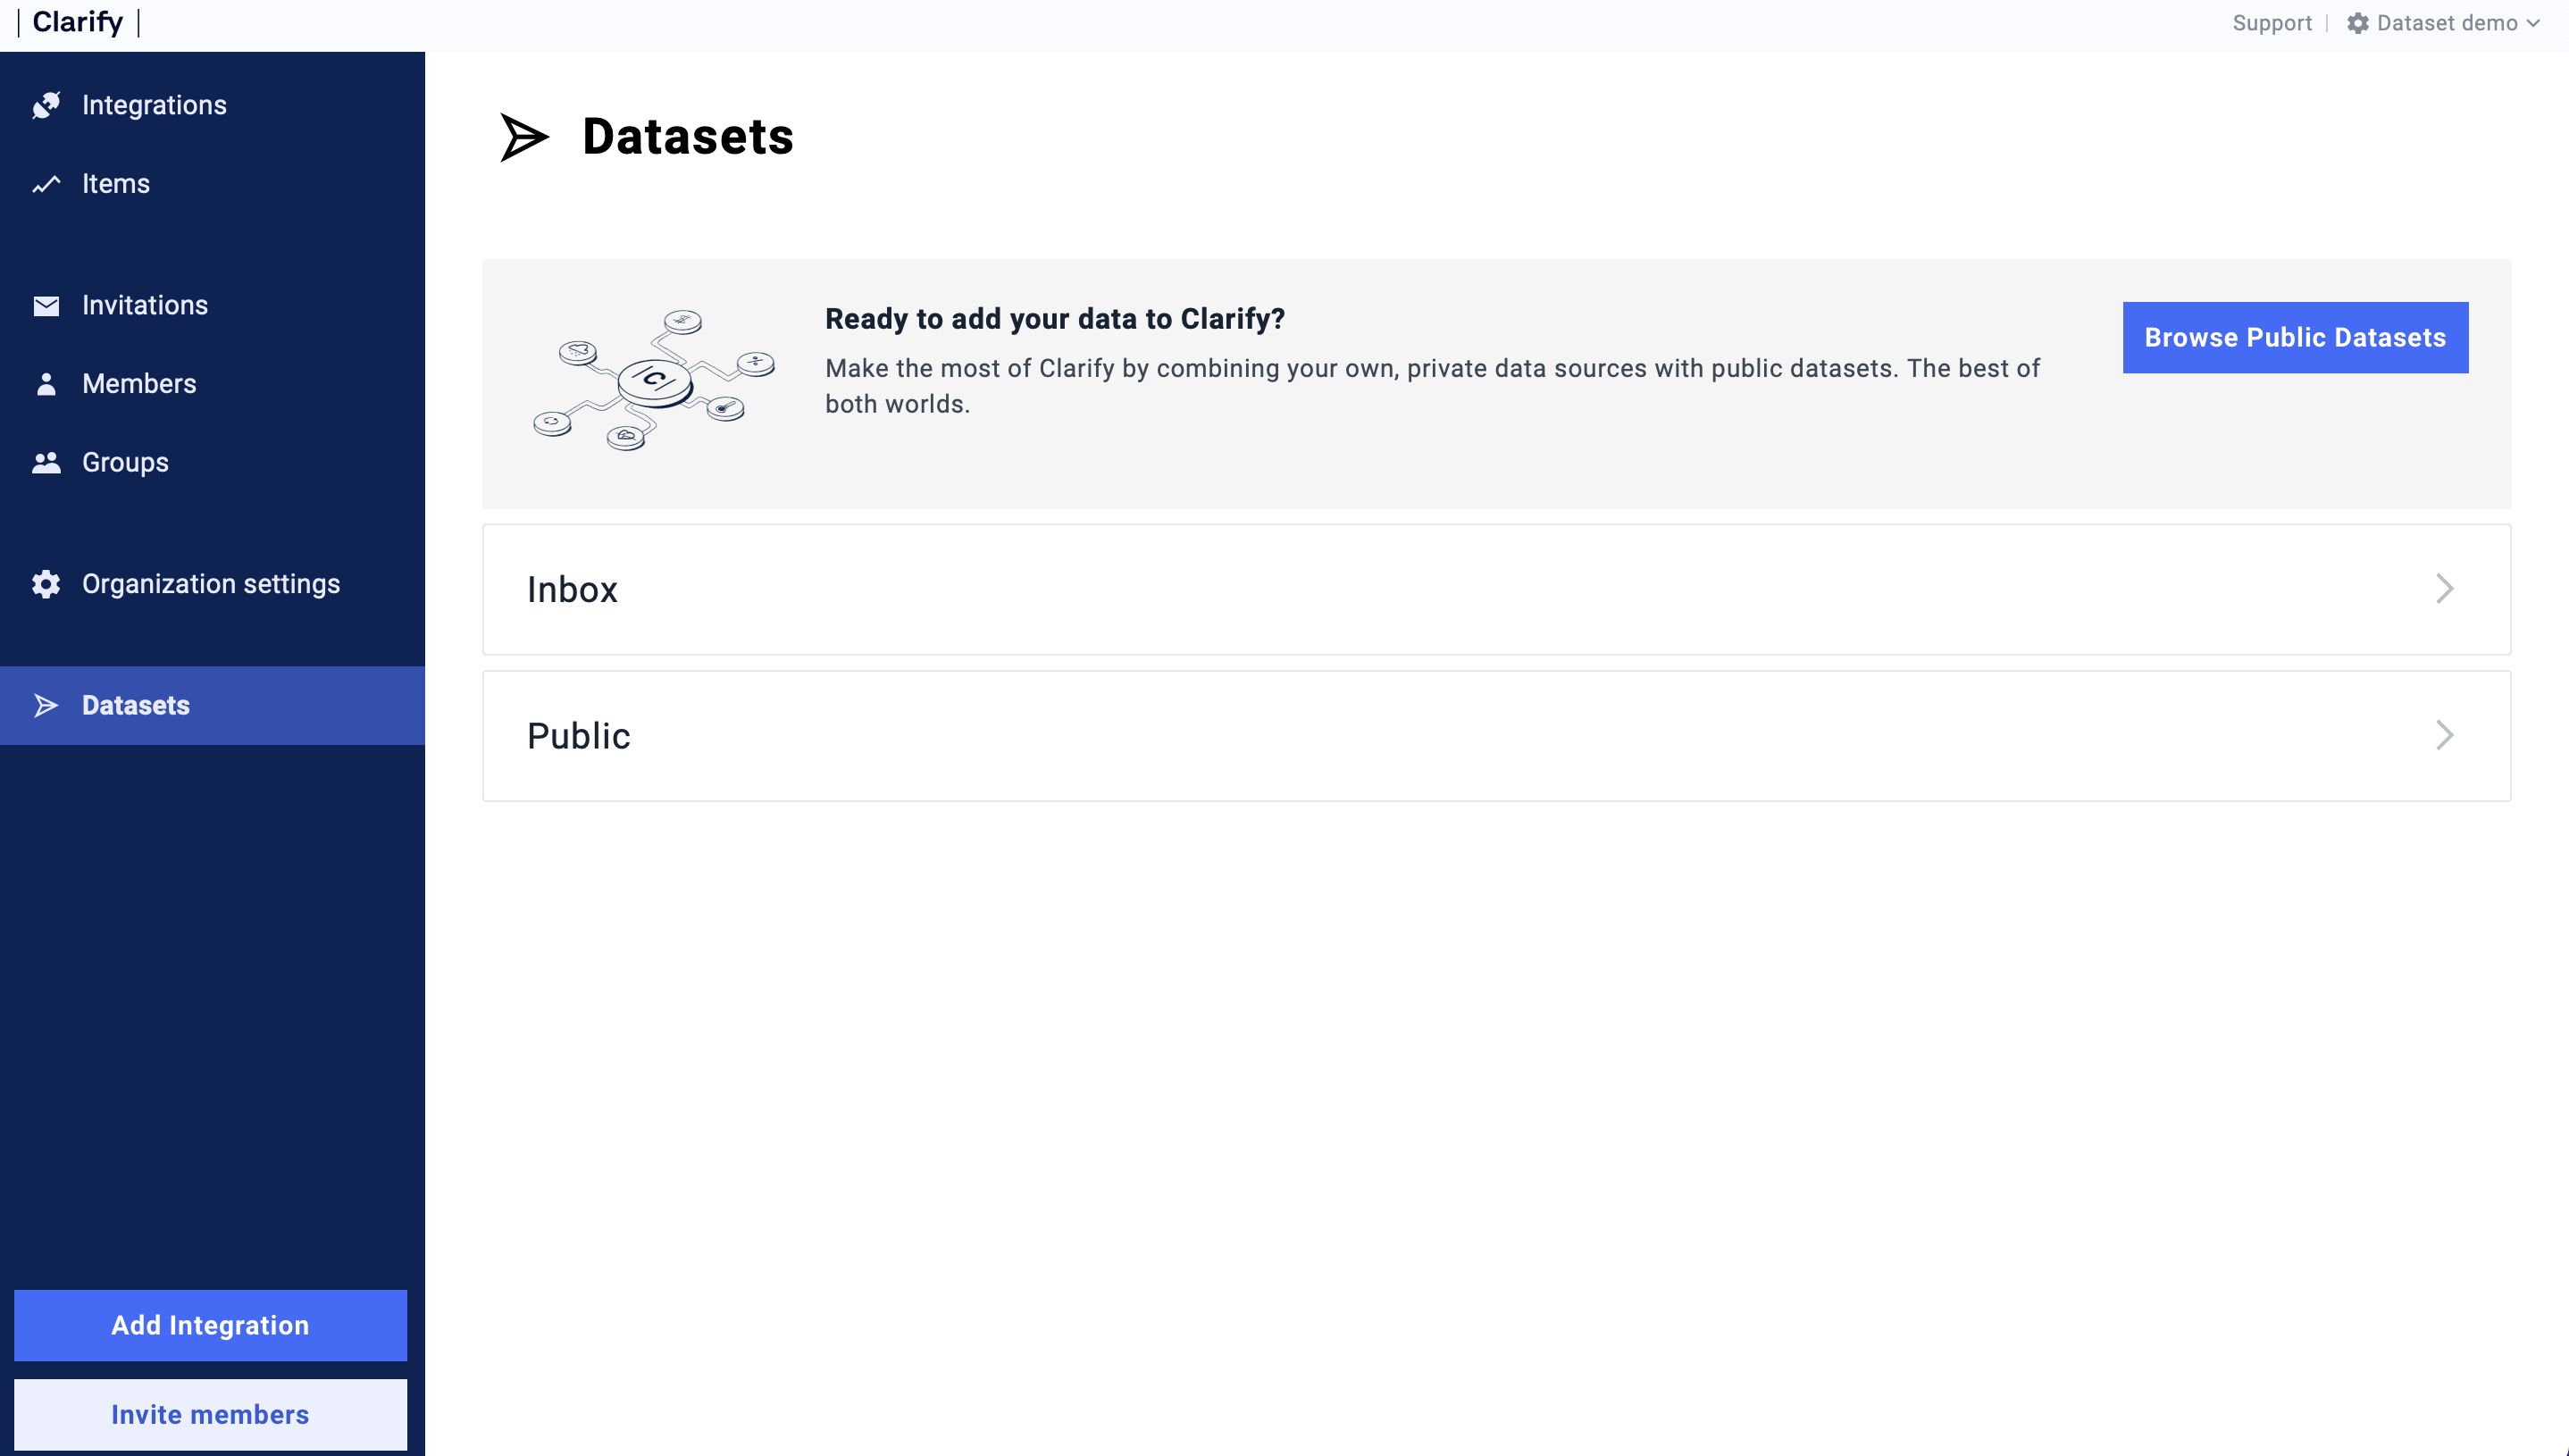 Available datasets in your organization.